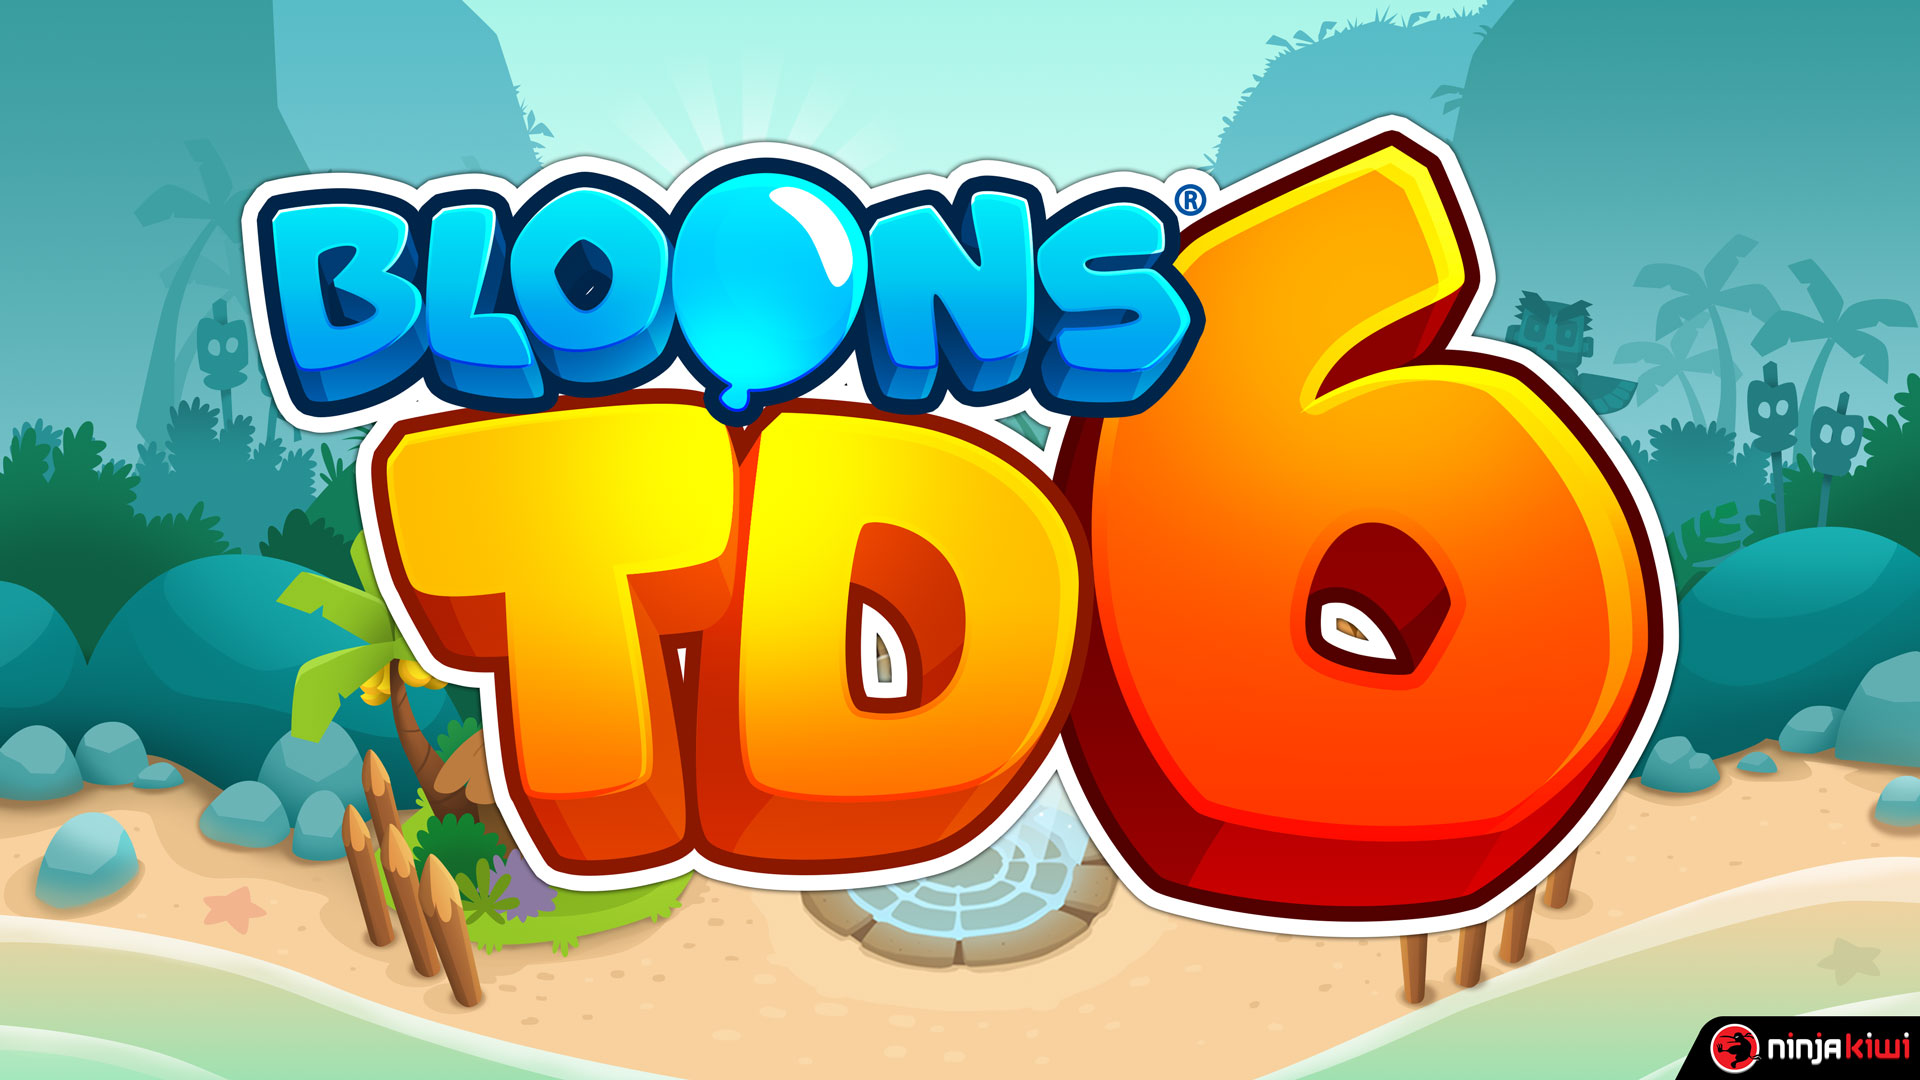 Bloons TD 6 New Update Adds 4 Player Co-op Mode